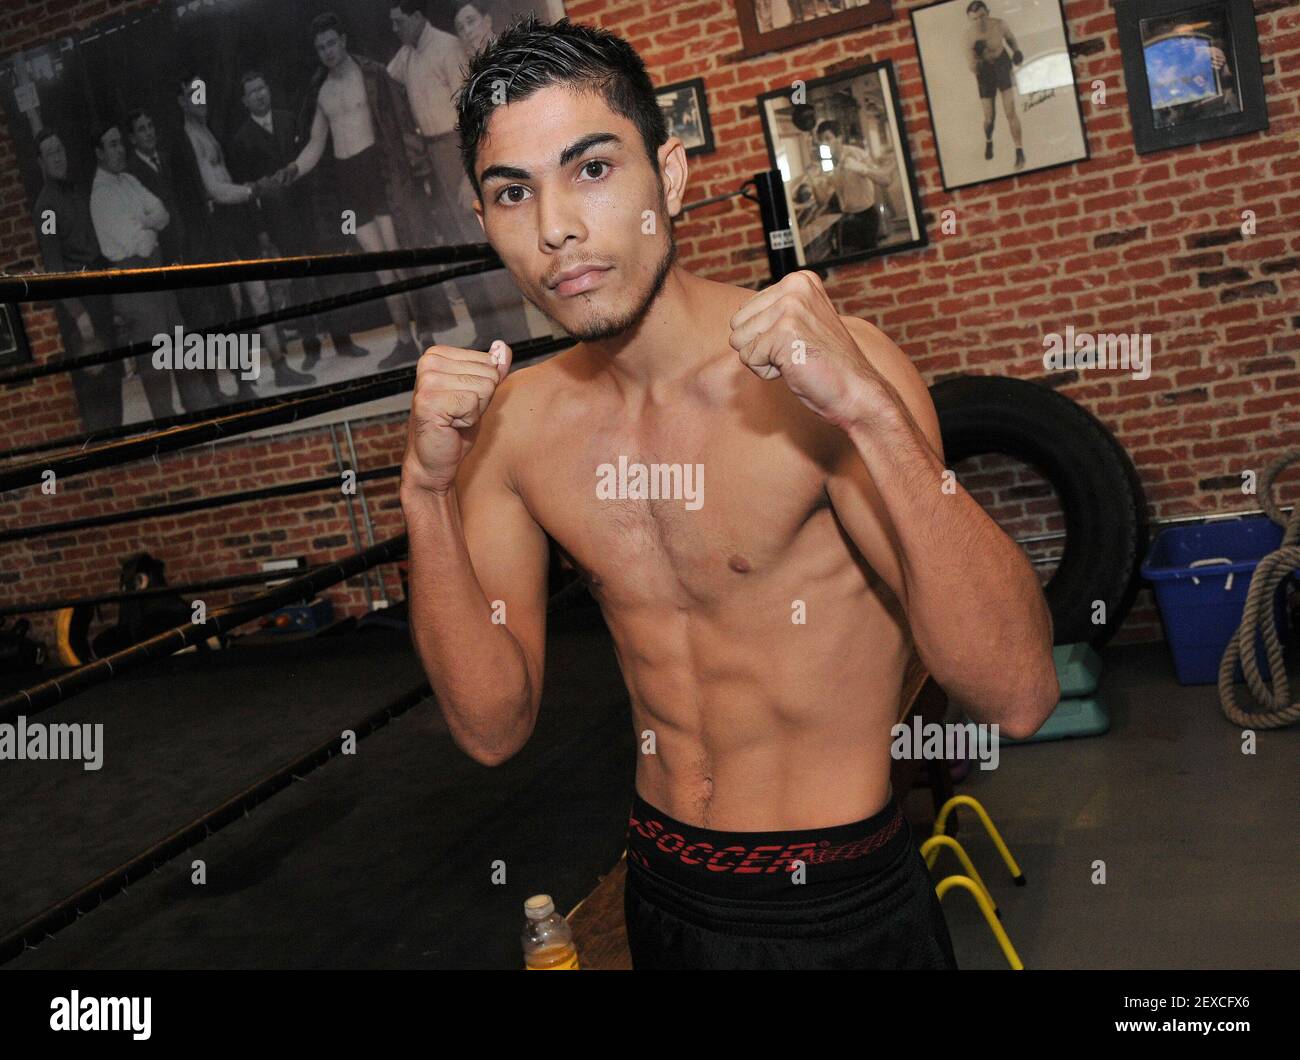 Undefeated Prospect from Mexico, Boxer Yardley Suarez at the Philippines  vs. The World Countdown Media Day held at Fortune Gym in Los Angeles, CA on  Wednesday, October 14, 2015. (Photo By Sthanlee